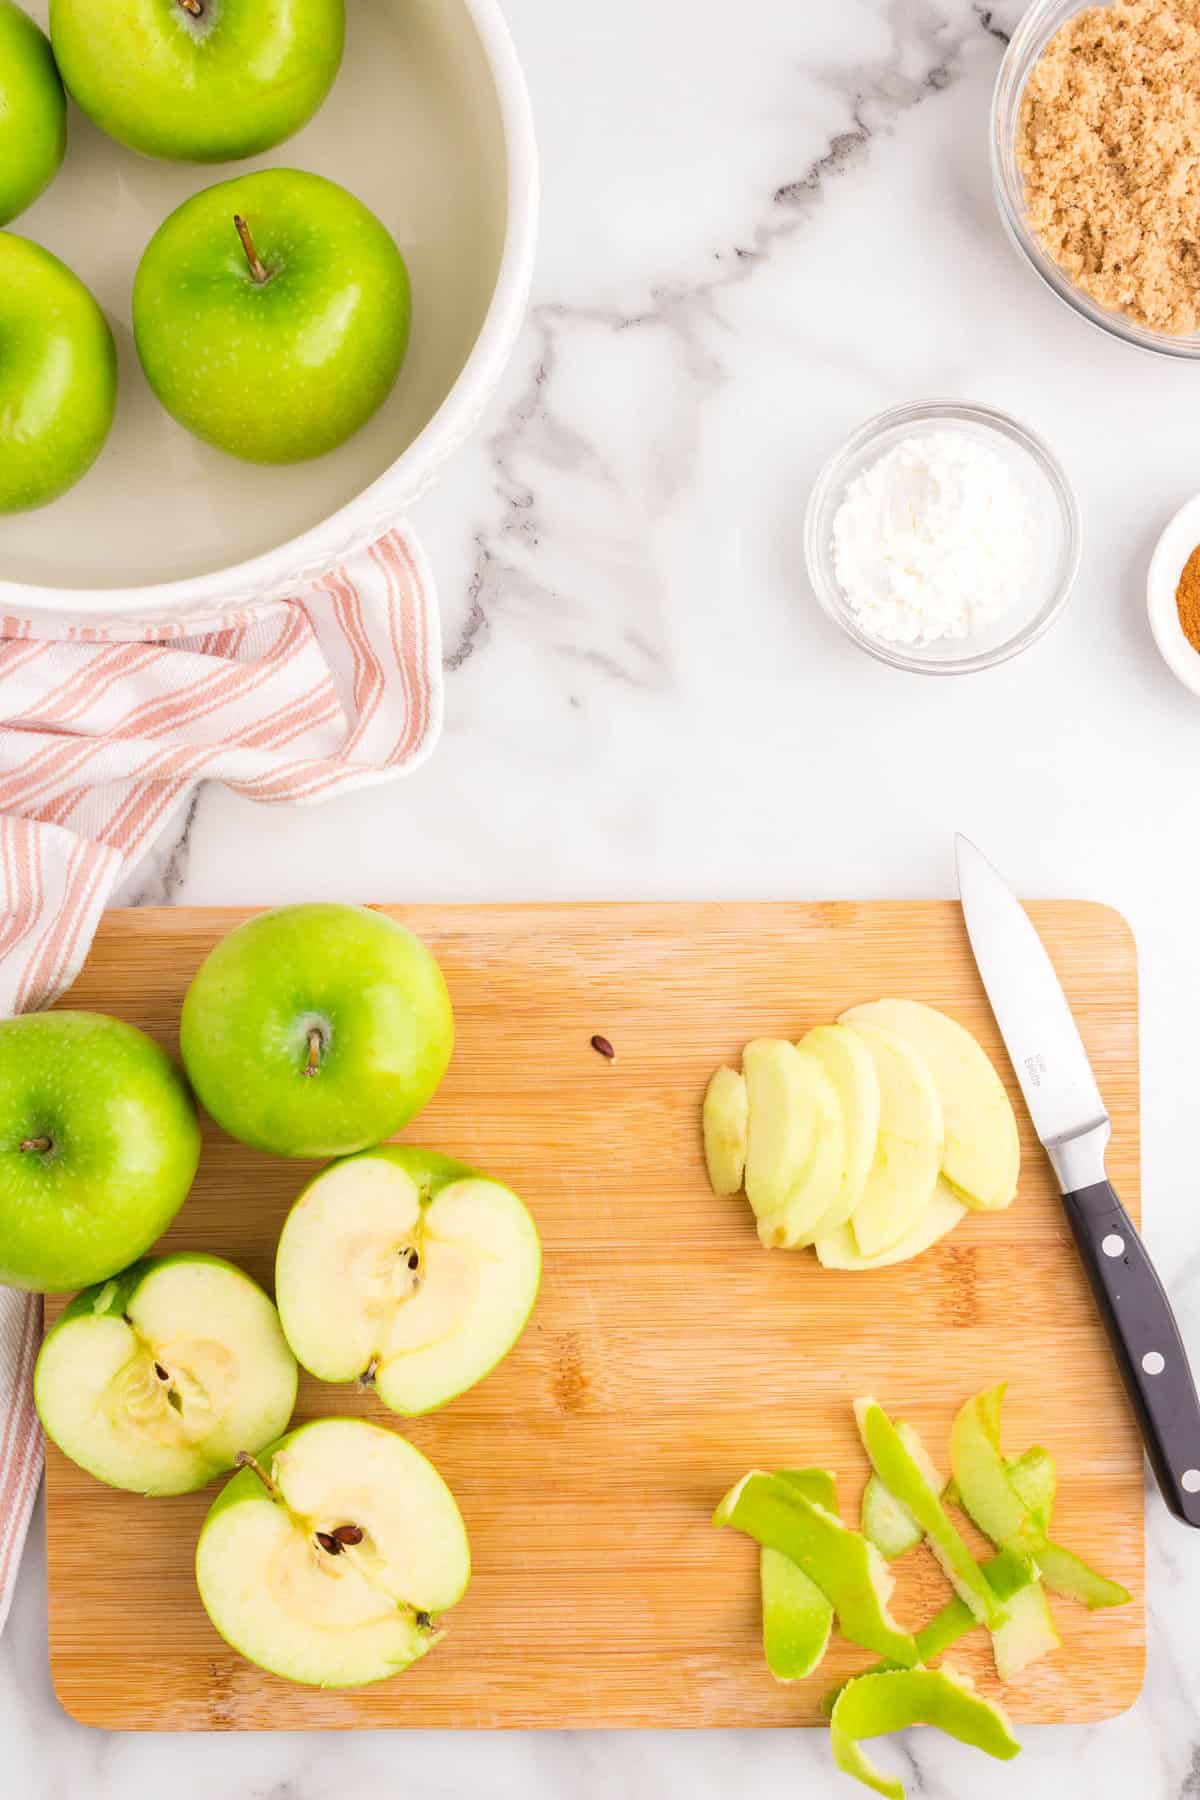 Preparing granny smith apples on cutting board for Apple Crumble recipe